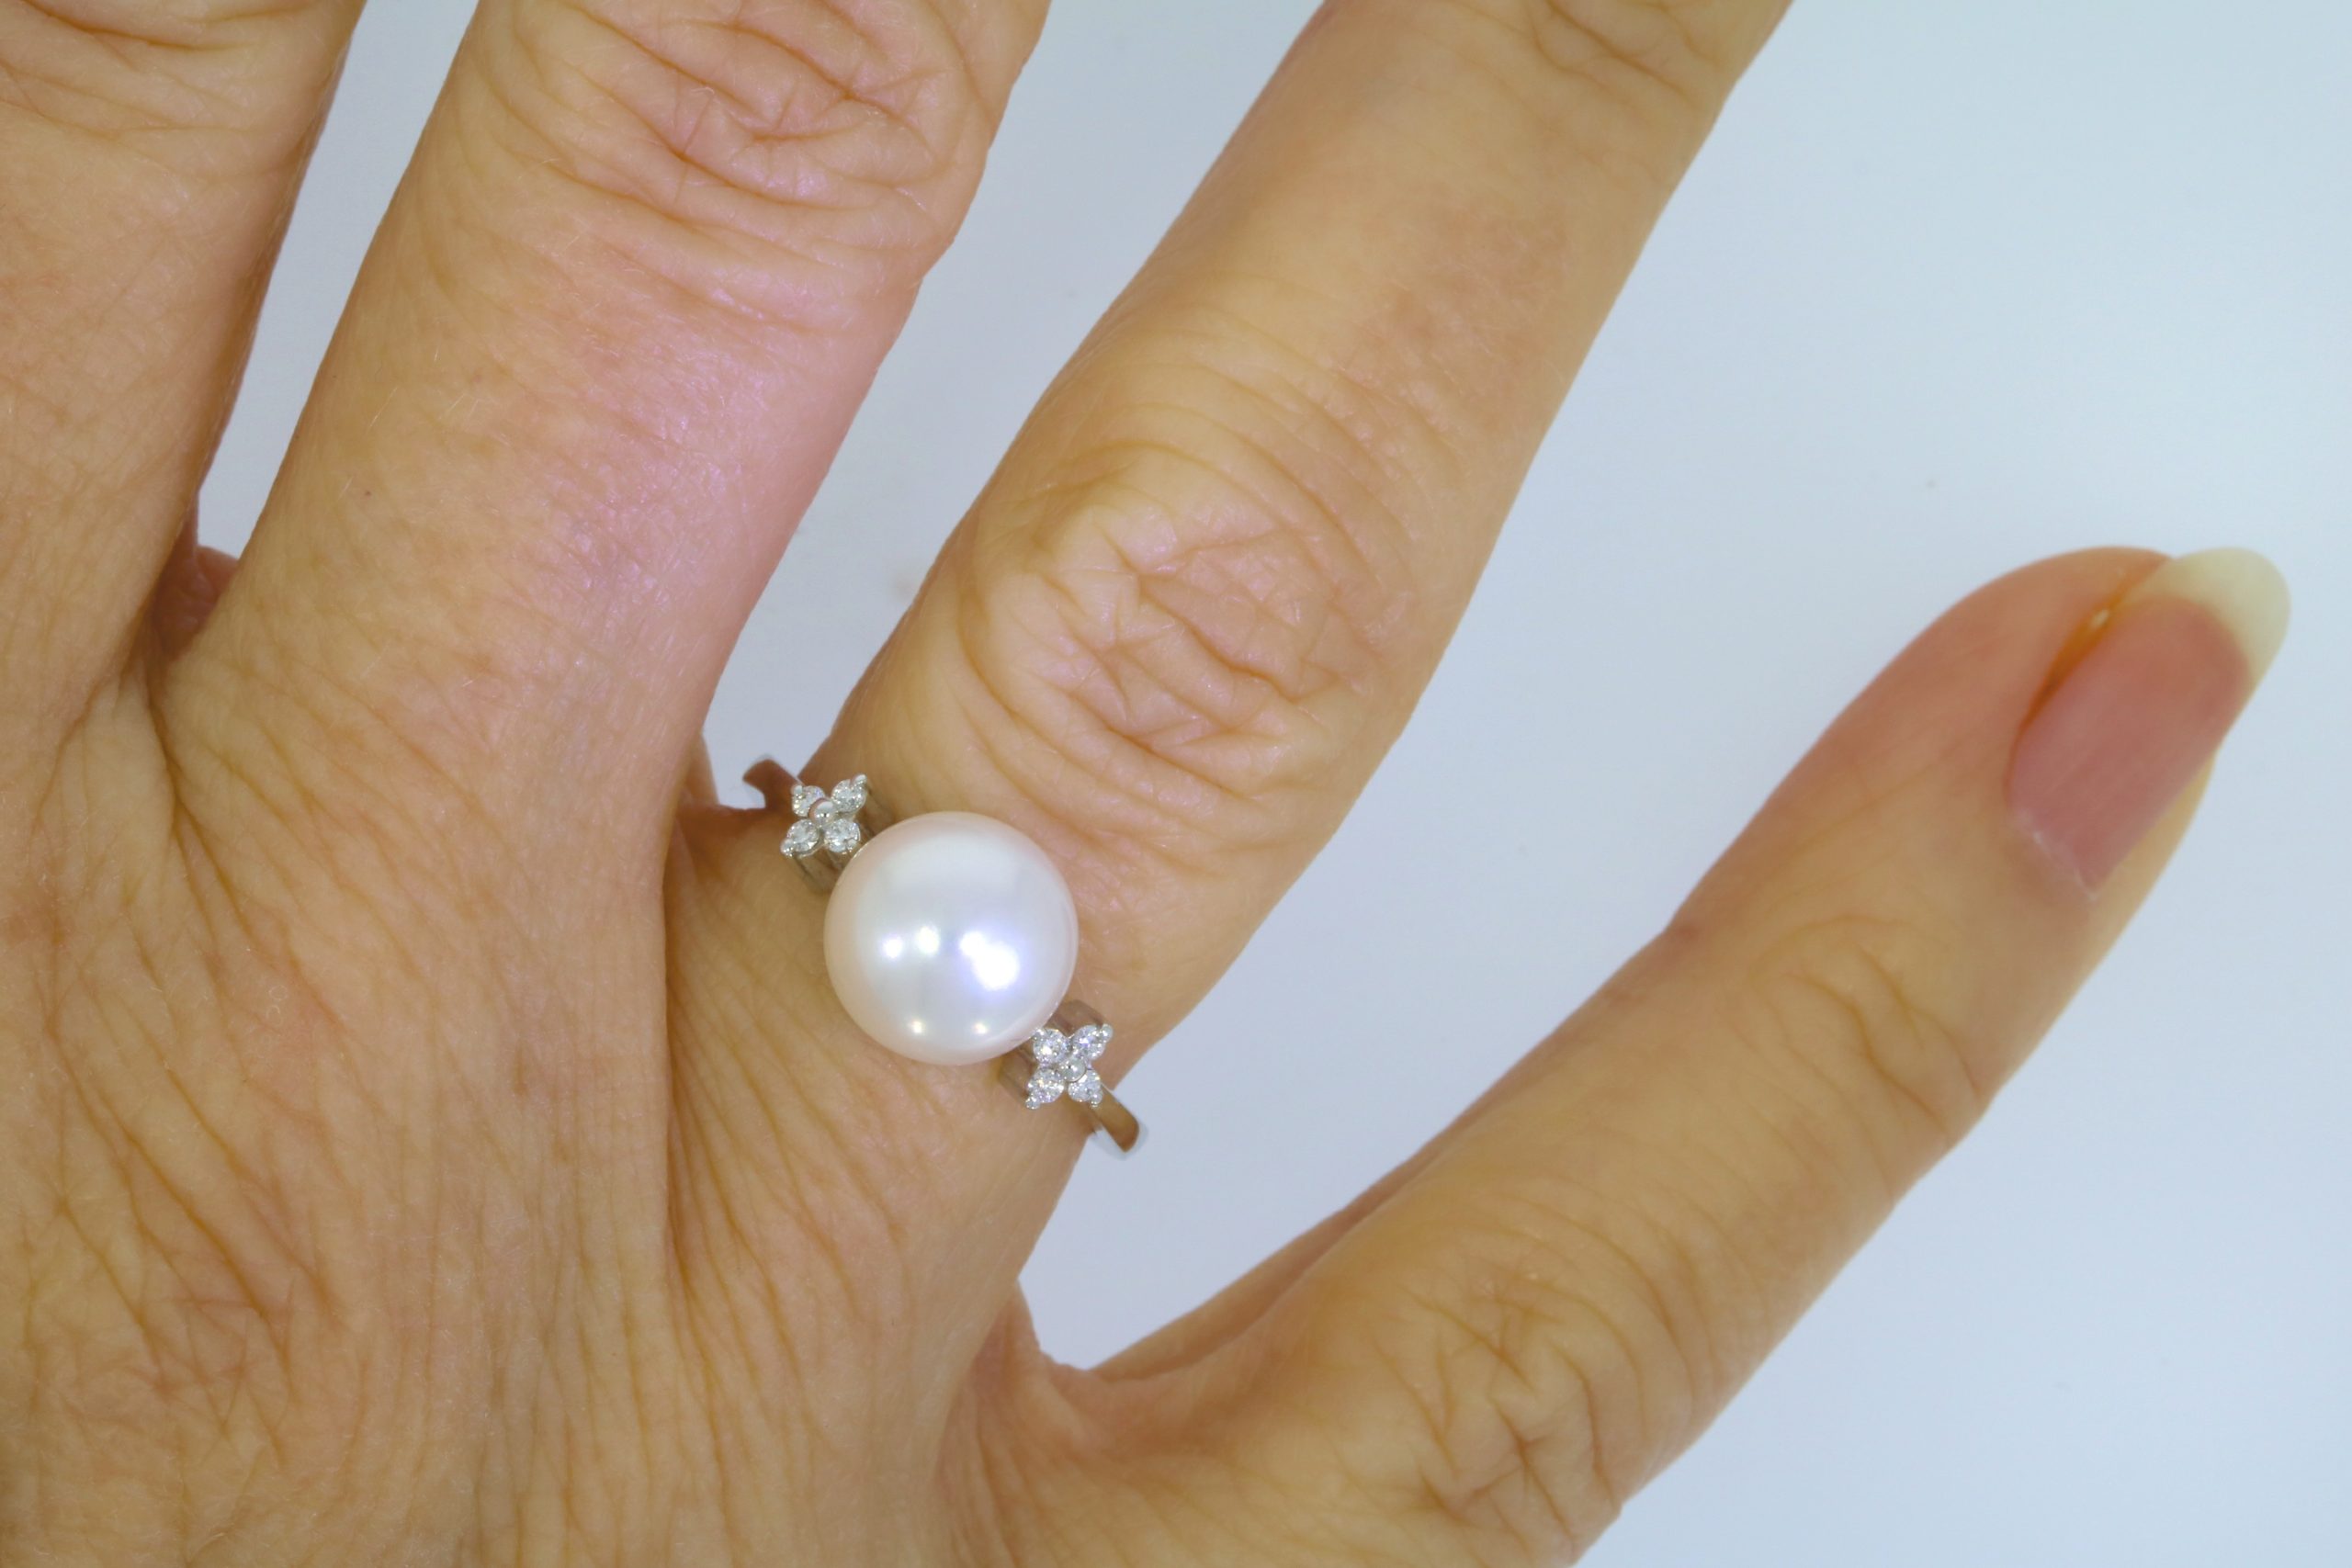 Diamond & Gold Jewellery 9ct White Gold & Diamond Freshwater Cultured Pearl Ring